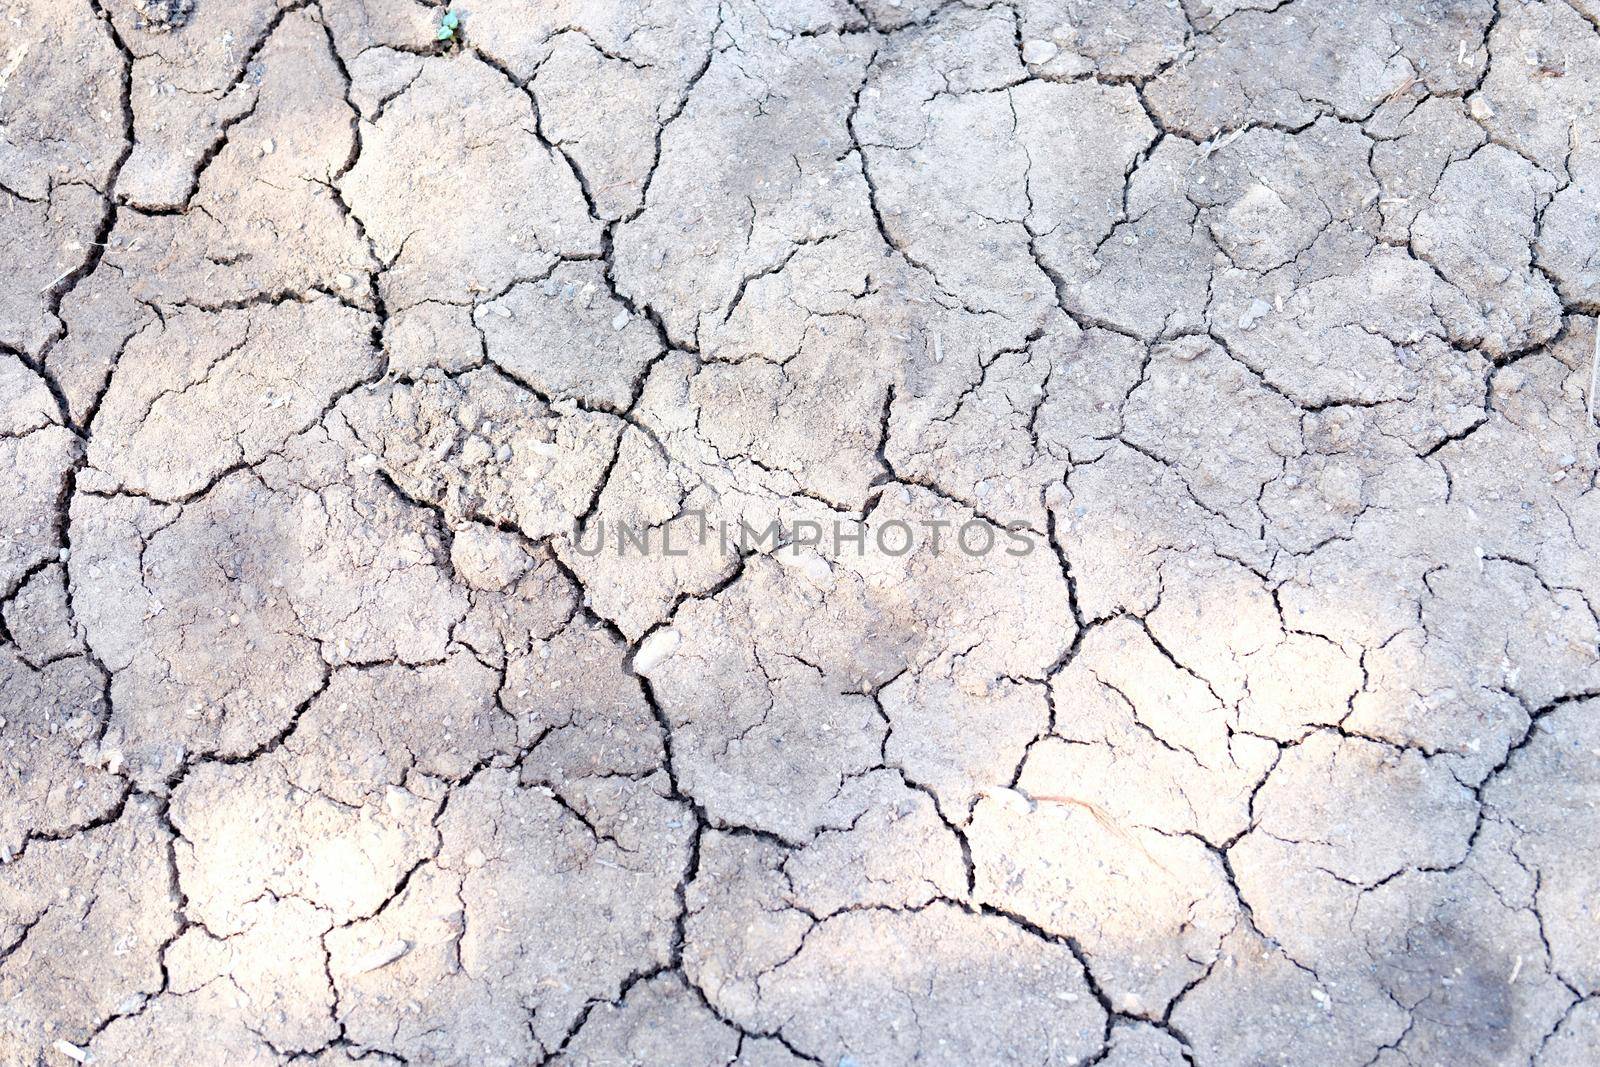 Cracked dry earth, close-up of soil erosion by kuprevich